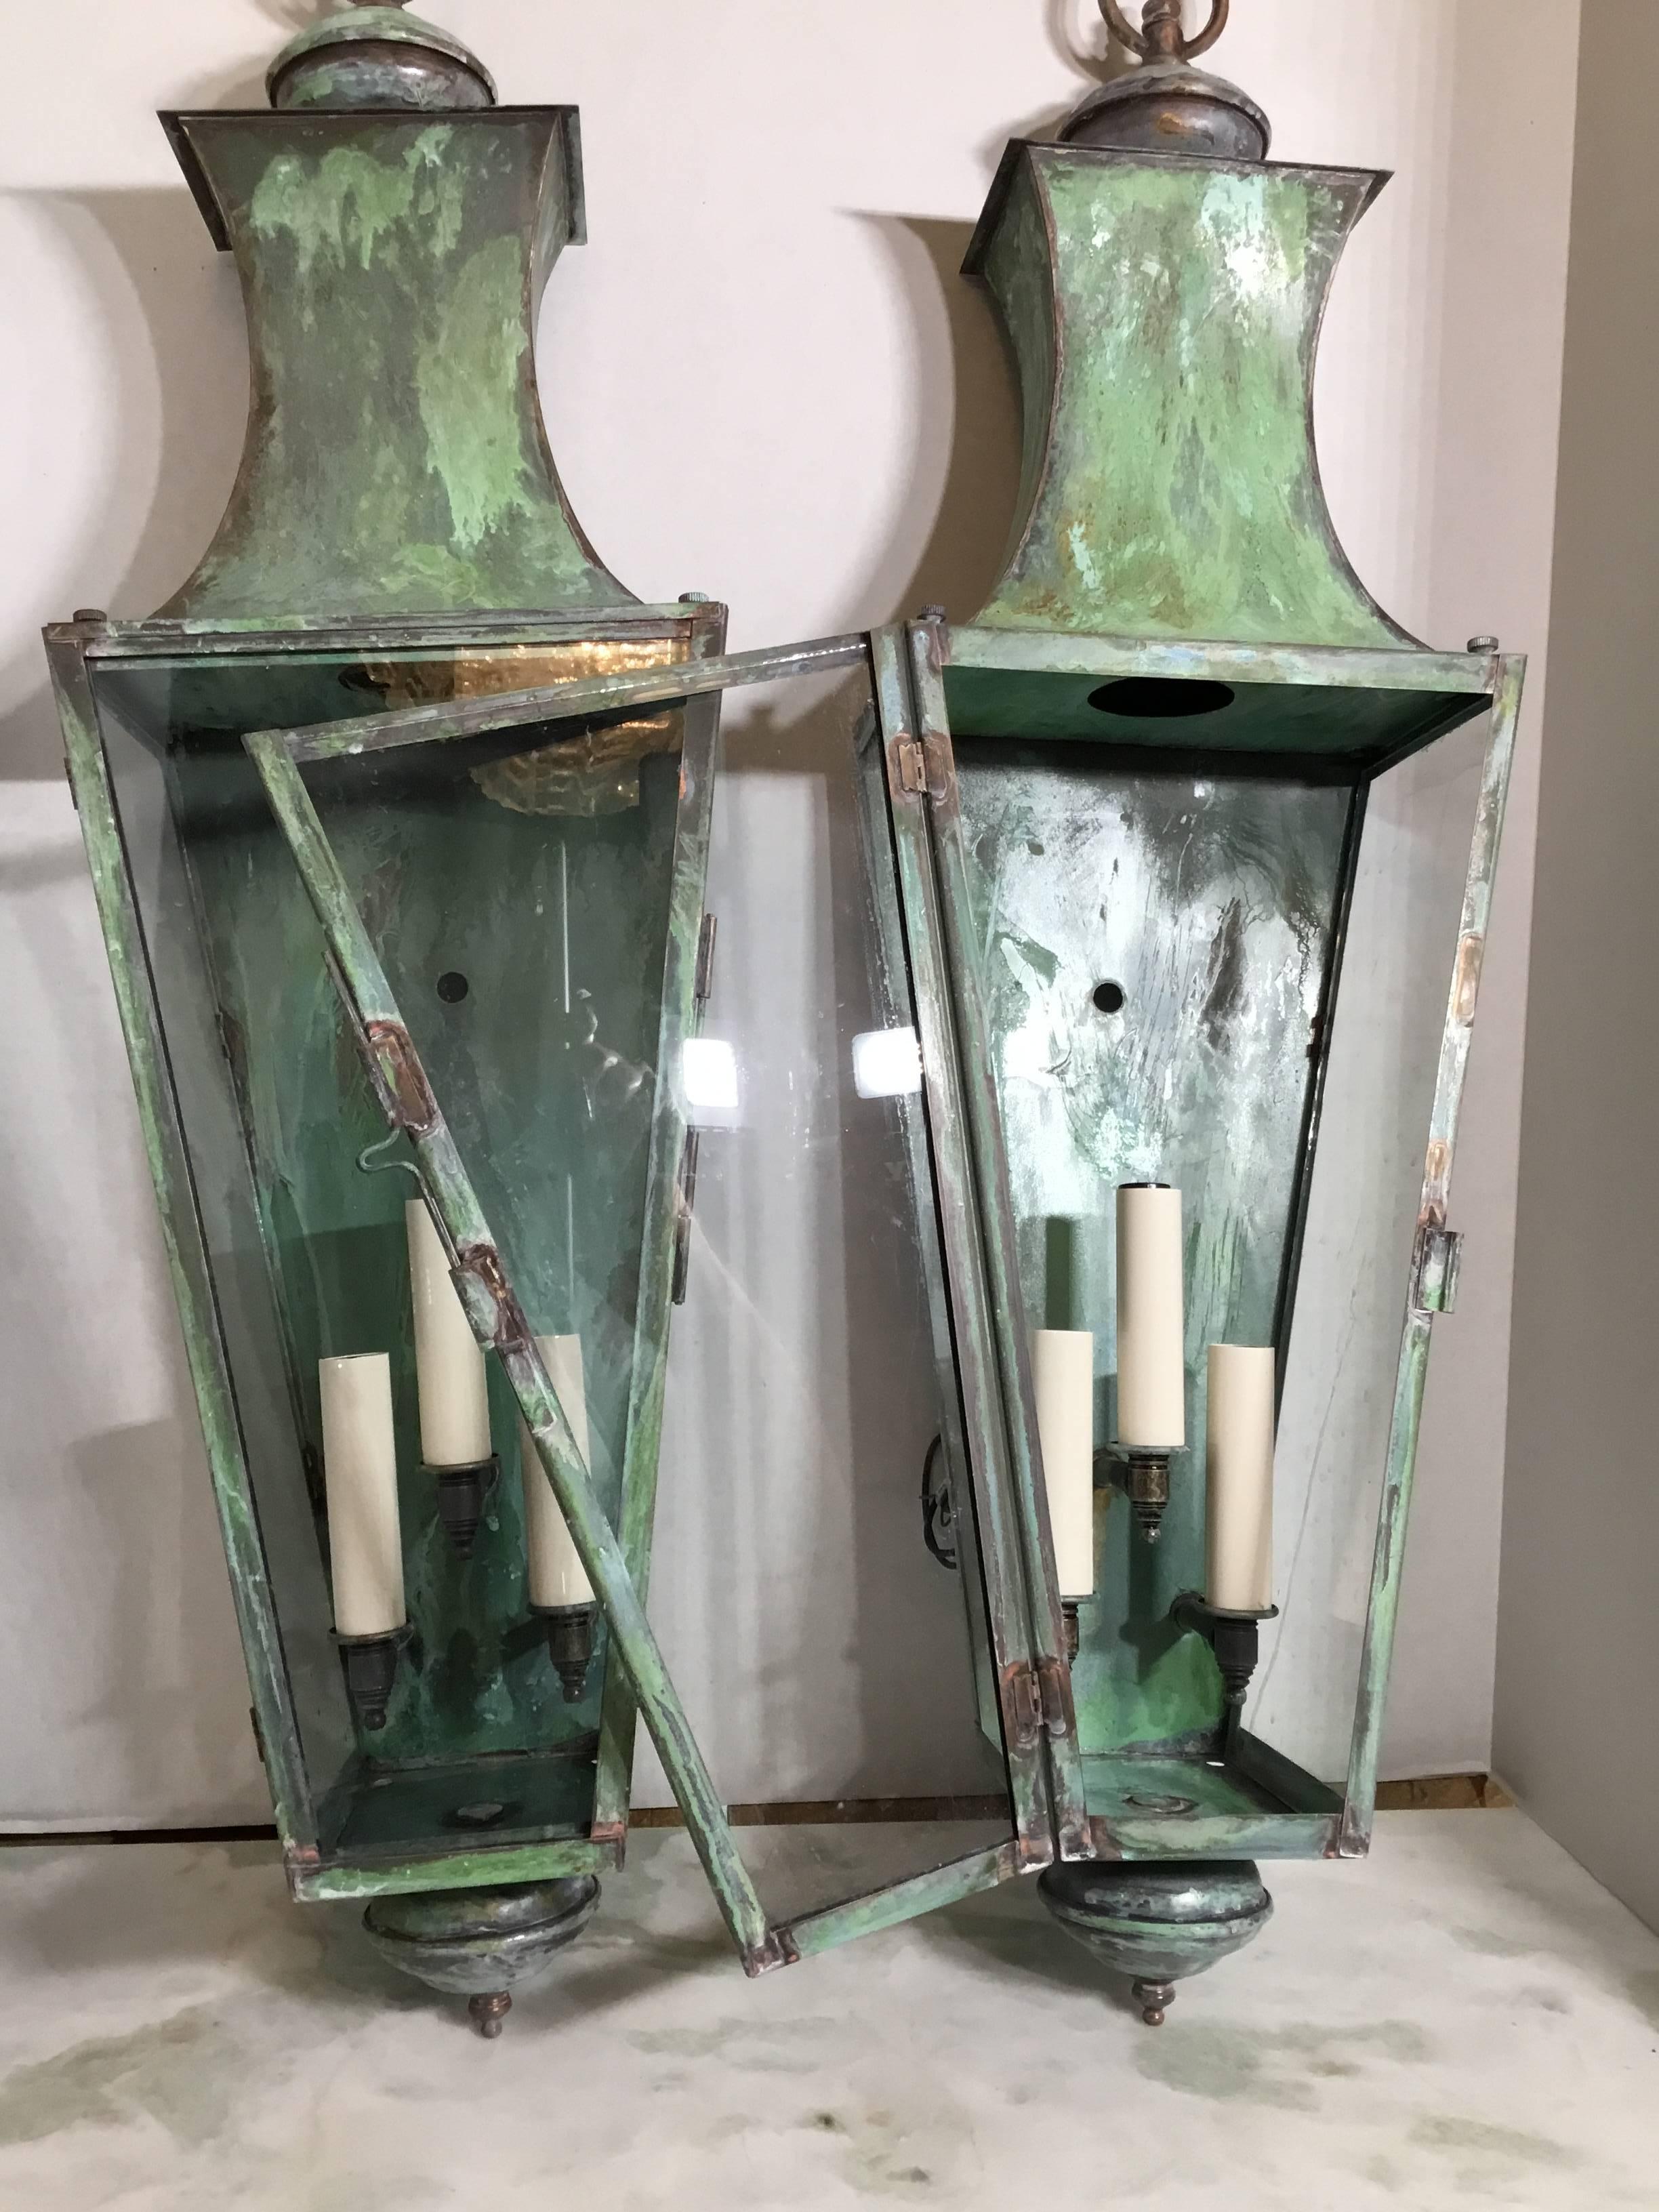 Pair of Architectural Copper Wall Lantern 4